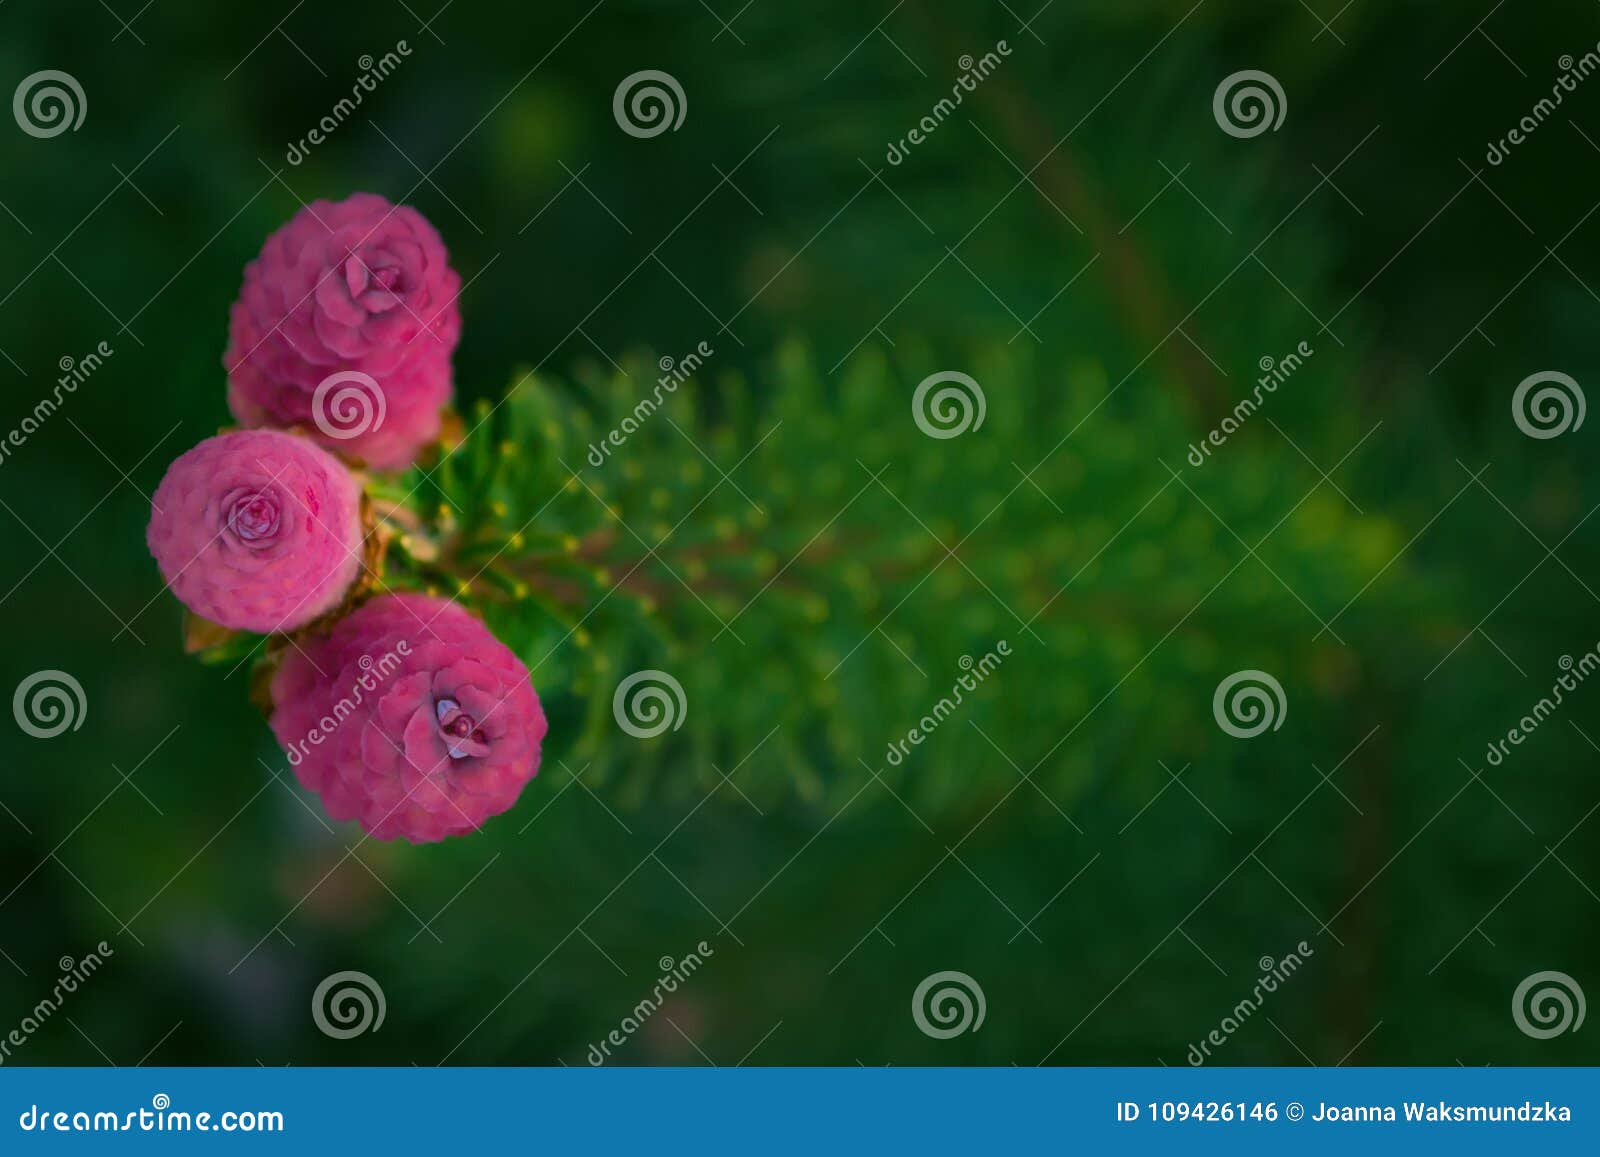 conifer tree branch blooming with pink cones